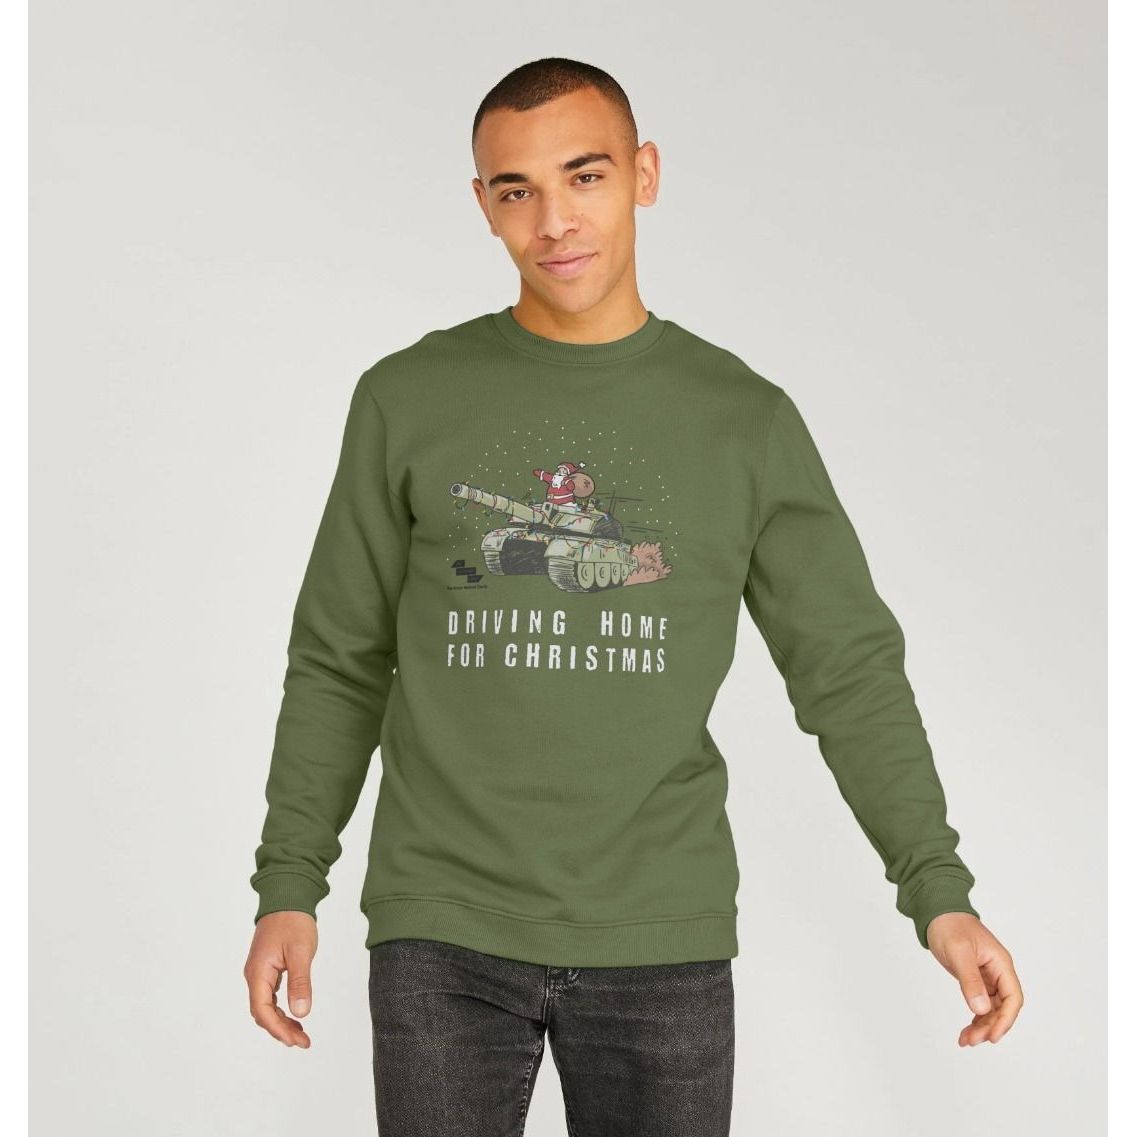 Unisex "Driving home for Christmas" jumper - ABF The Soldiers' Charity Shop